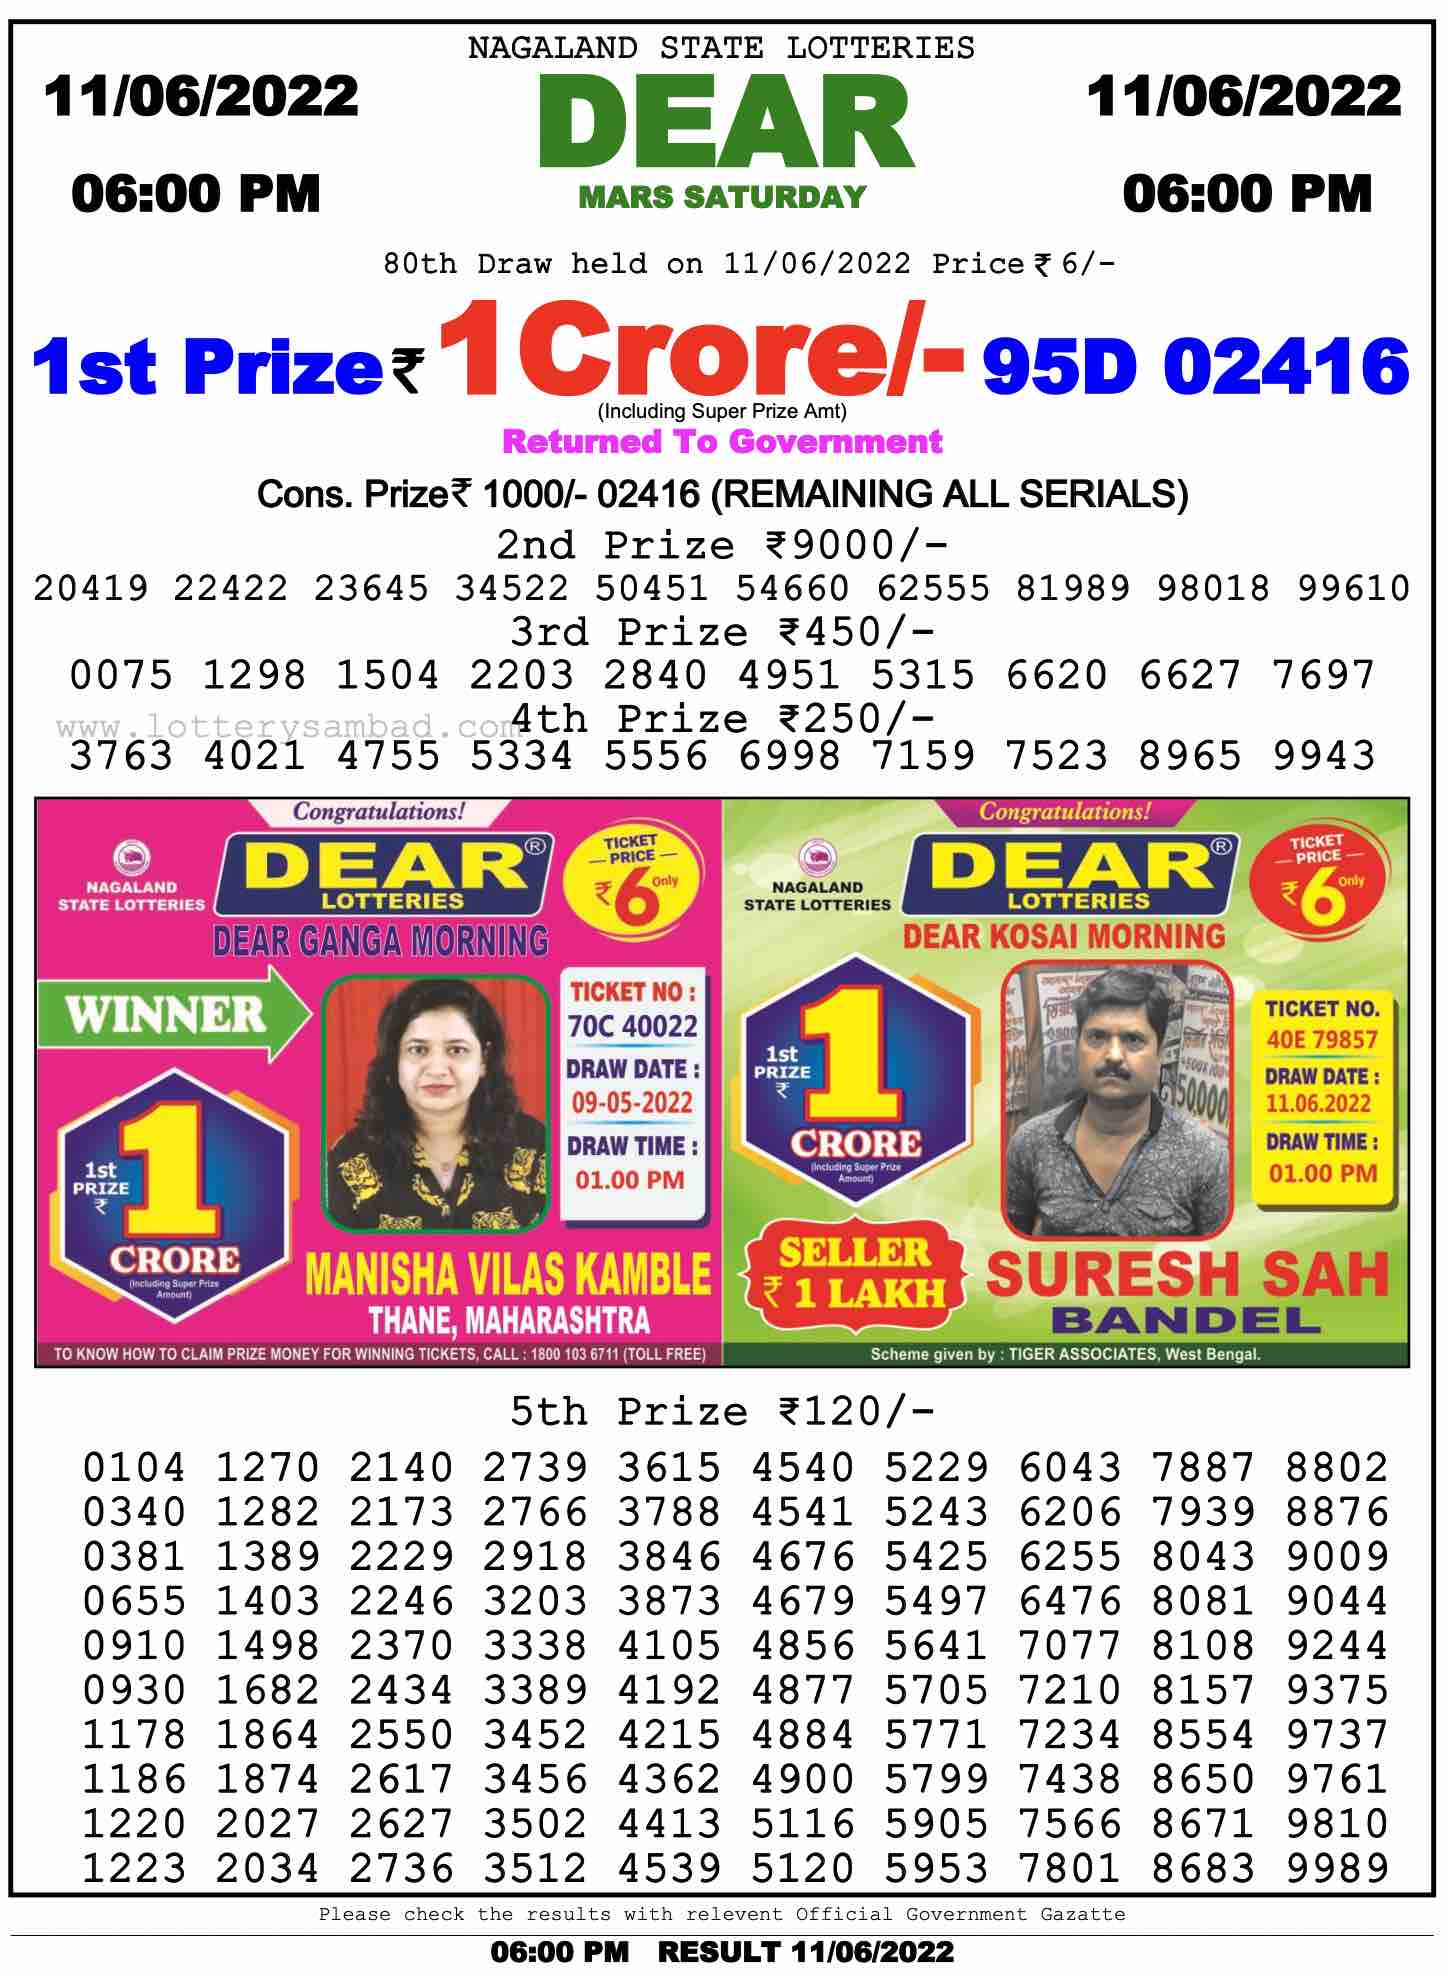 Download Result of Nagaland State Dear 6 Draw 11-06-2022 Draw at 6:00Pm